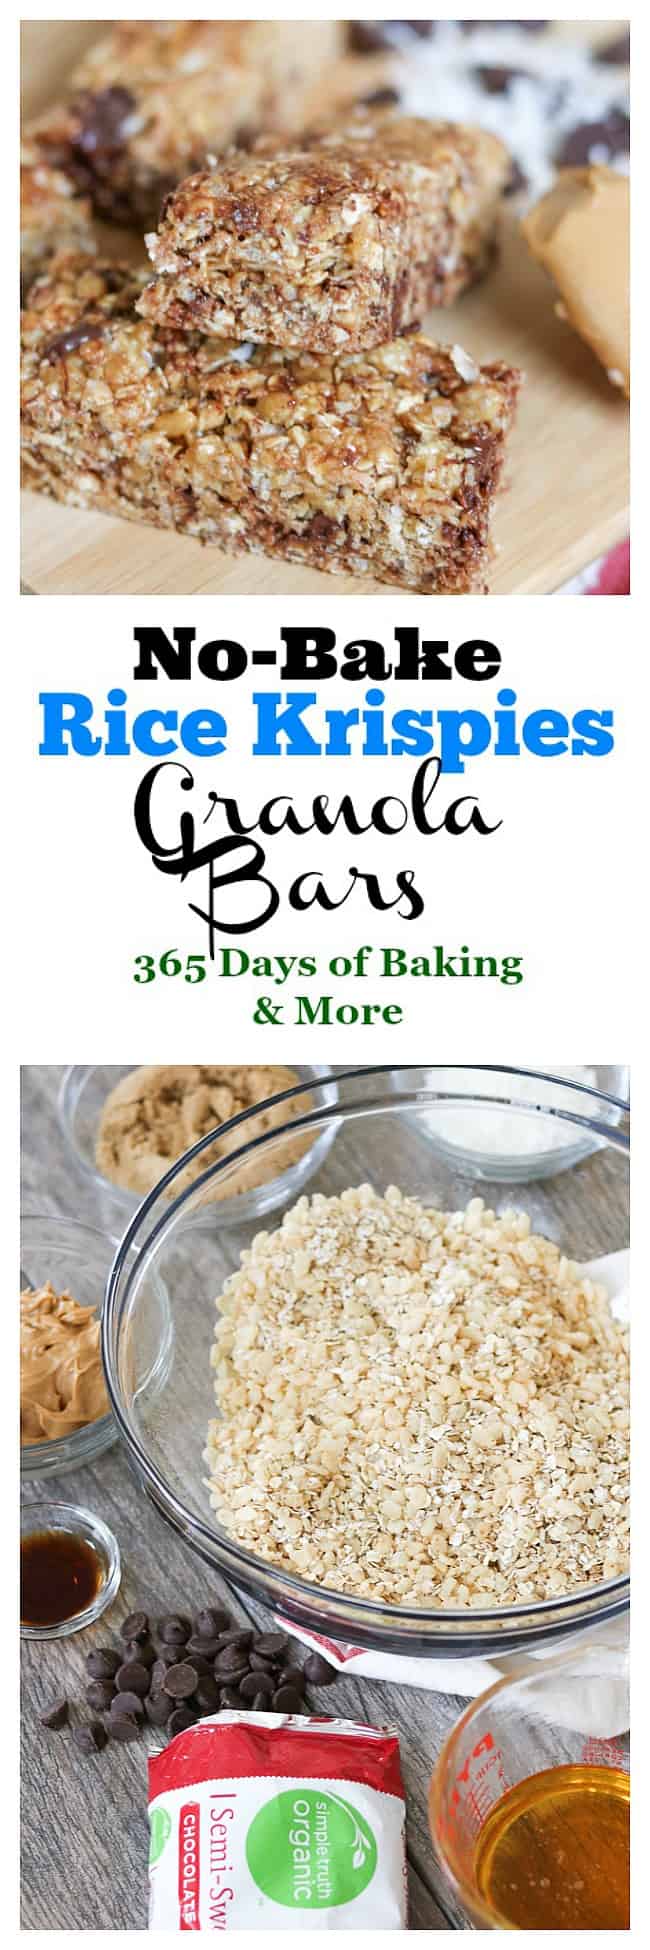 These No-Bake Rice Krispies Granola Bars are a perfect bite for breakfast on the go. Soft, crunchy and slightly sweet, they're made with Rice Krispies cereal, honey, Simple Truth Organic Semi-Sweet Chocolate Chips, oats, peanut butter, and coconut. Grab one as you're heading out to work or have one a mid-morning snack!